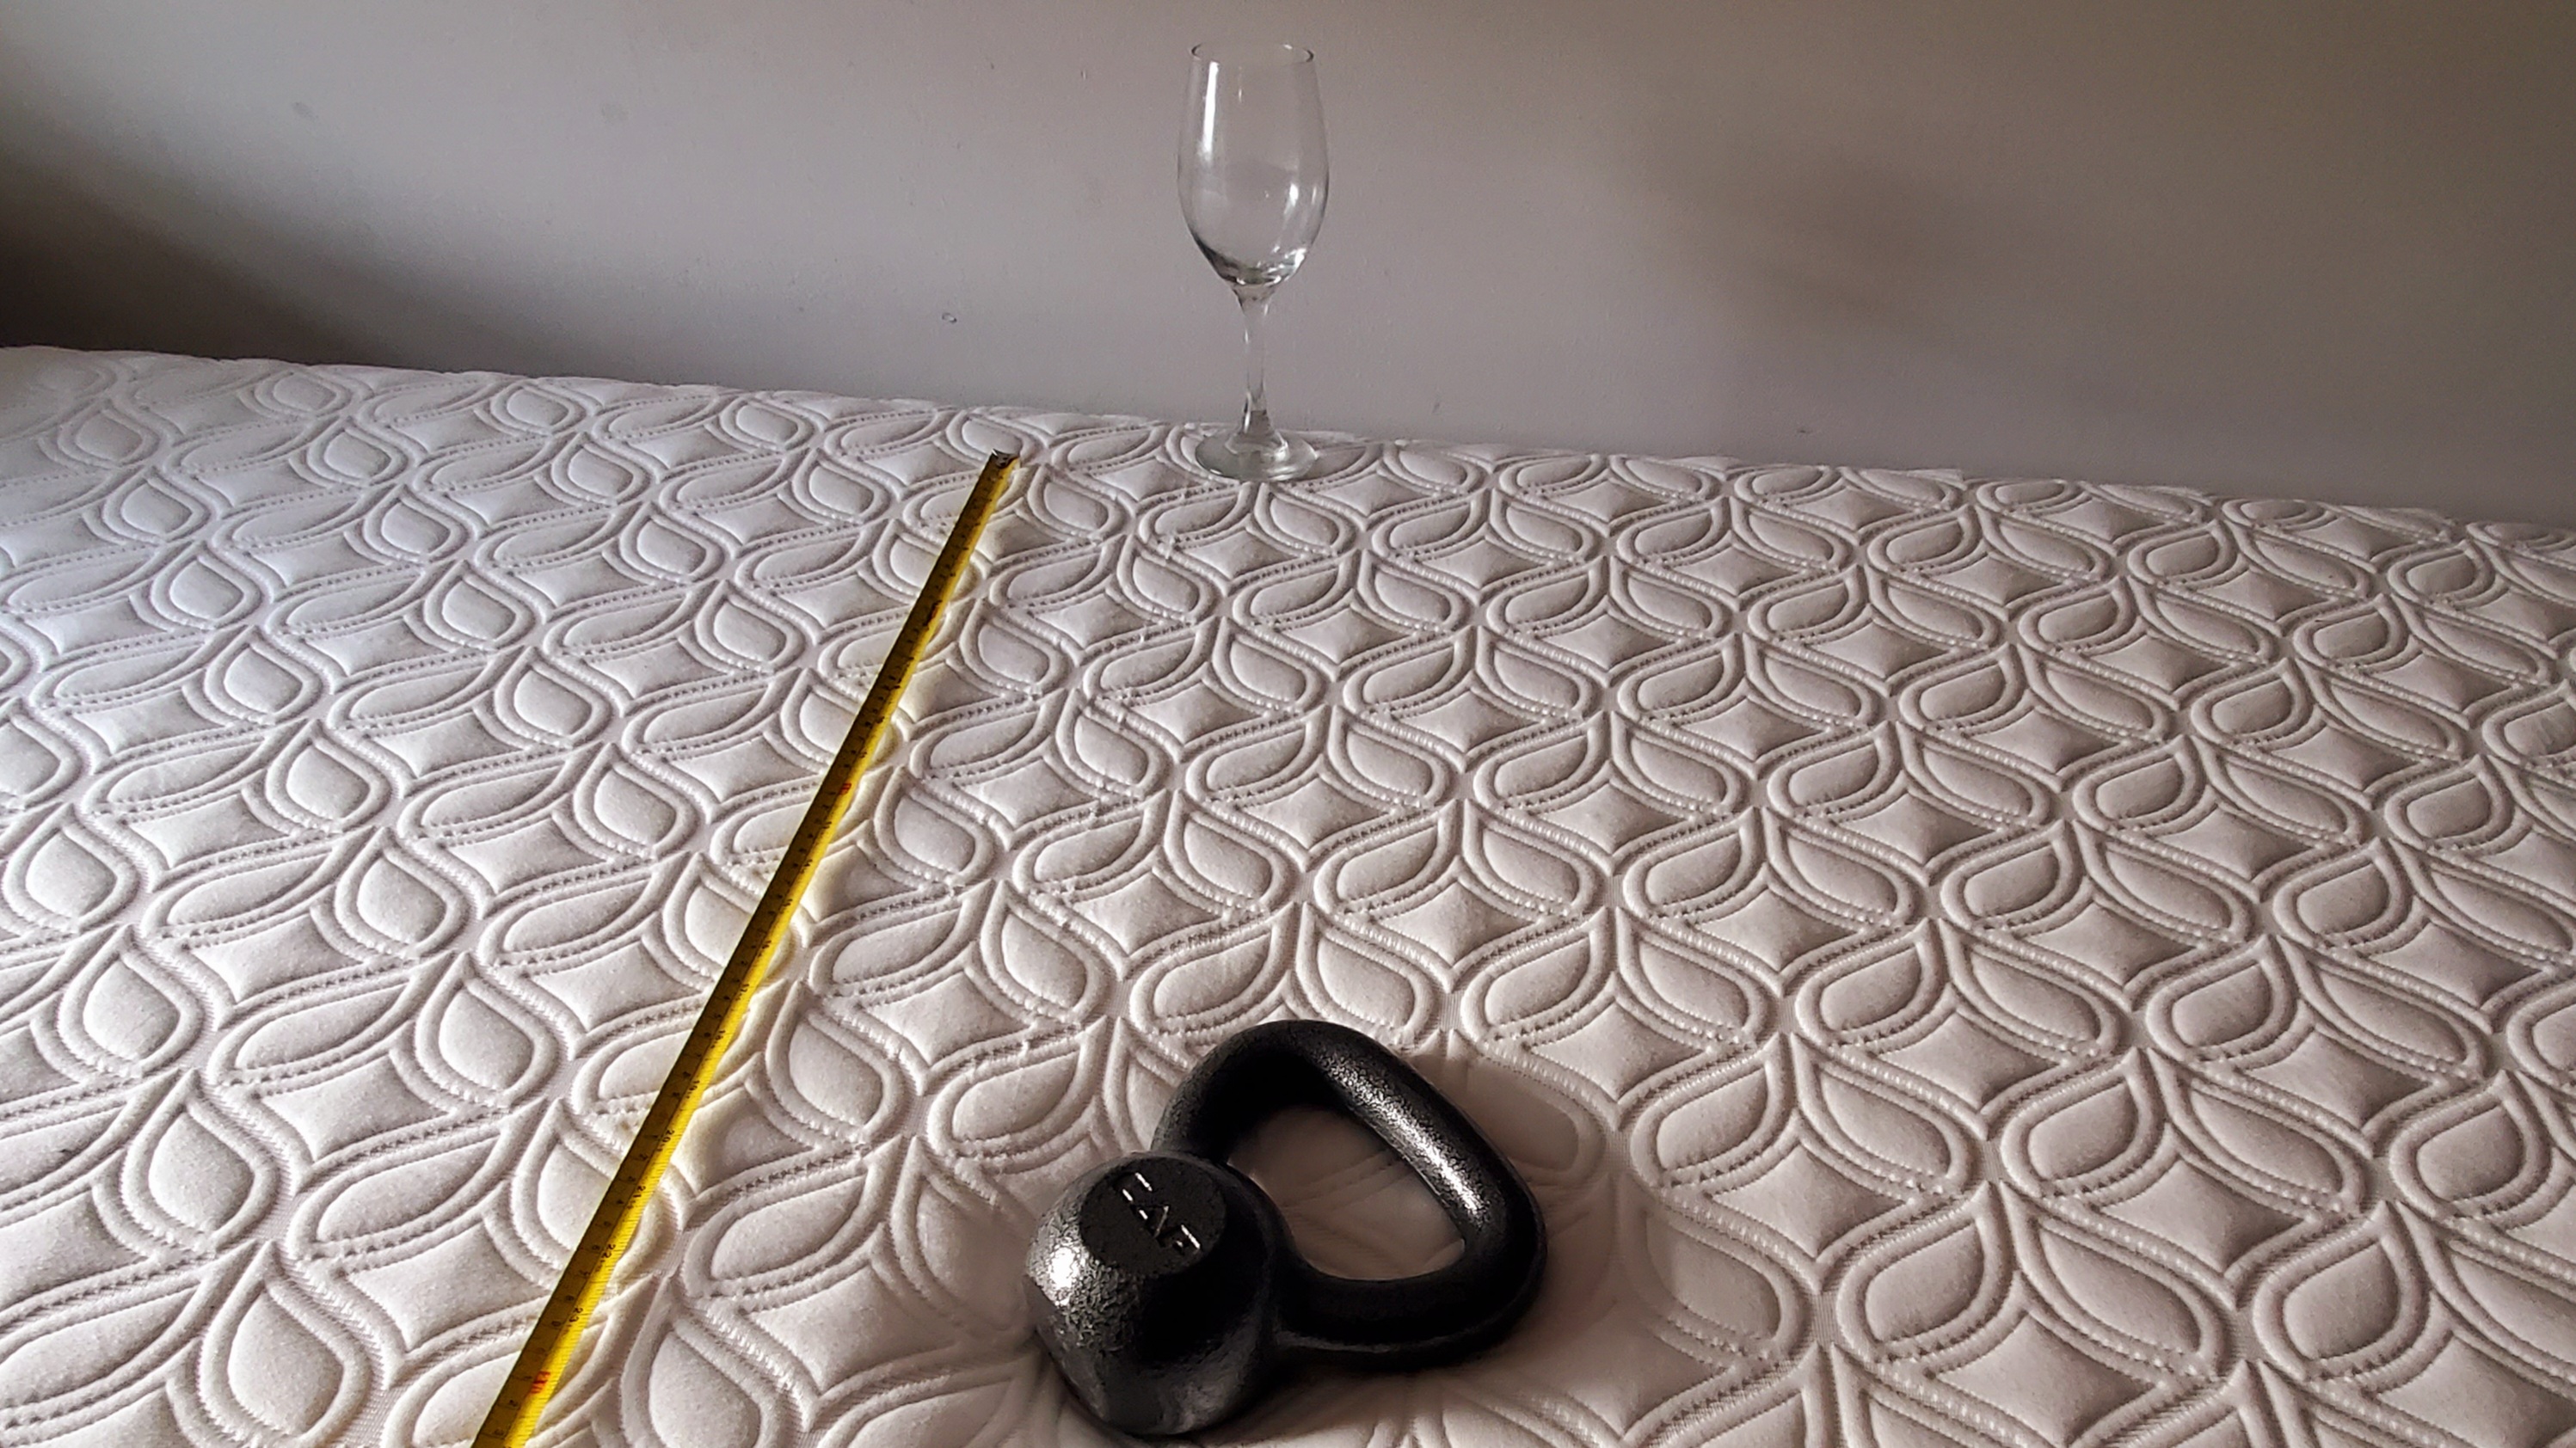 Cocoon by Sealy Chill mattress review, testing motion isolation with an empty wine glass, kettlebell, and tape measure